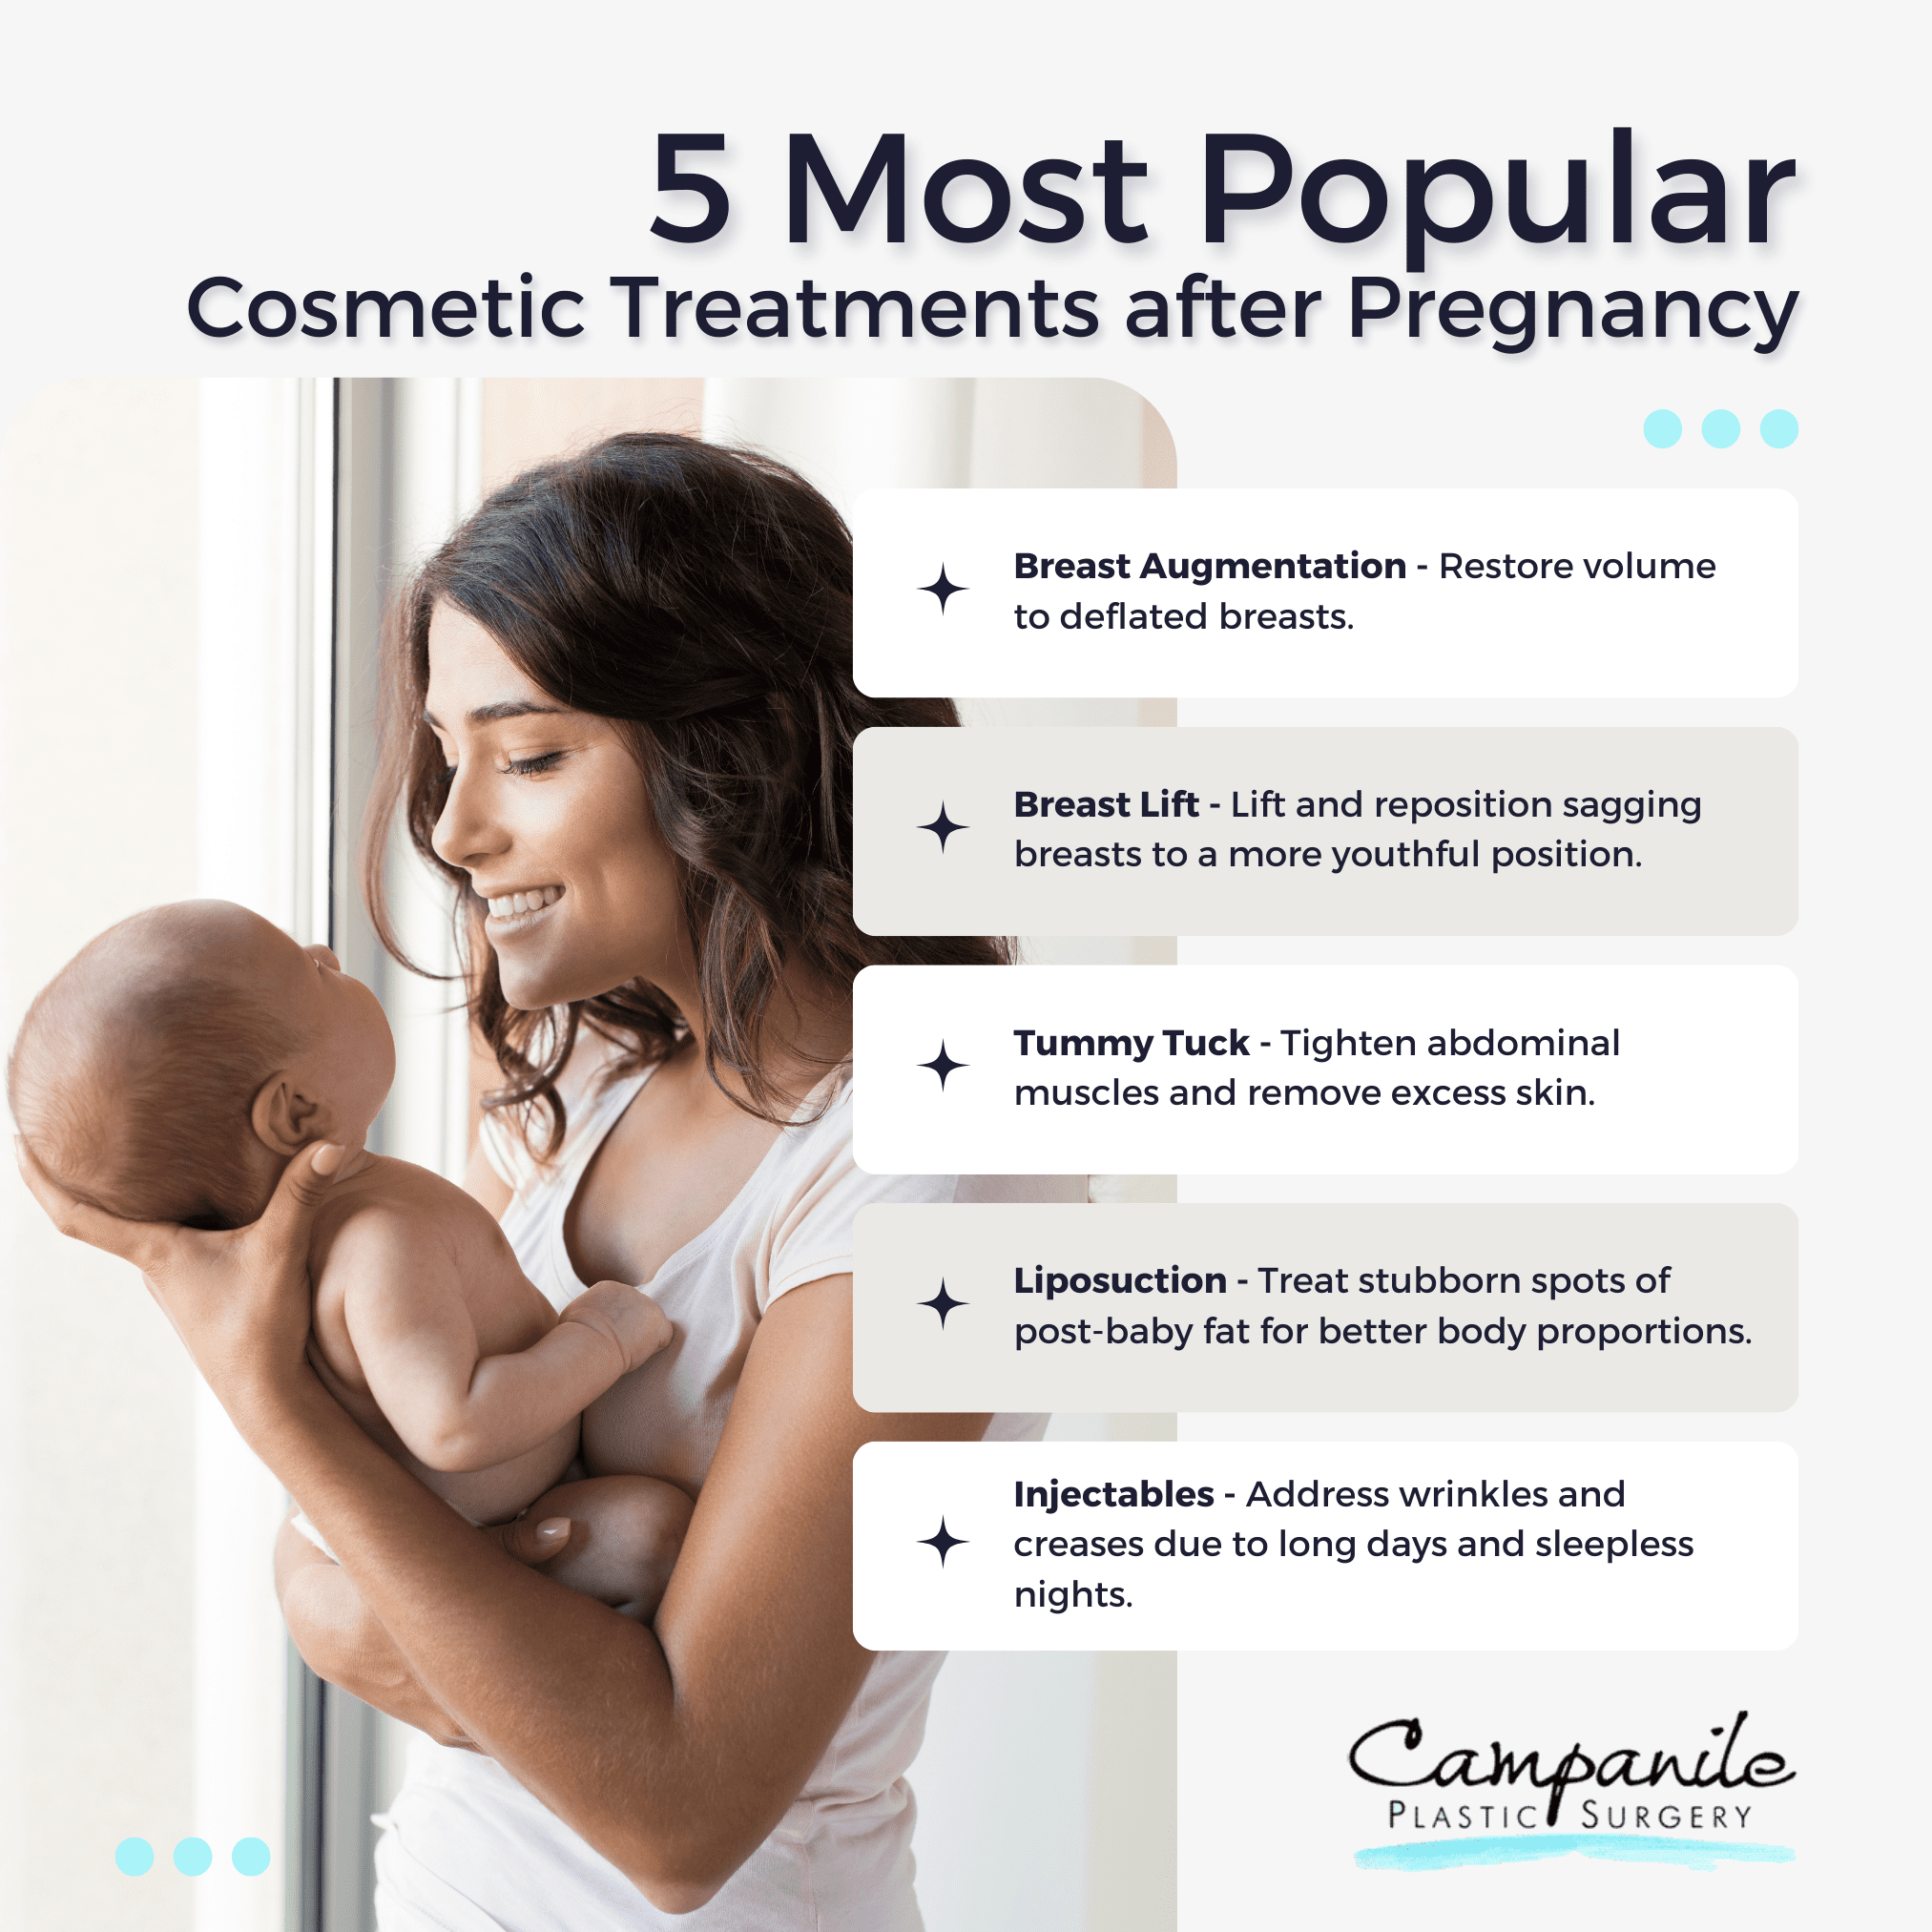 5 Most Popular Cosmetic Treatments after Pregnancy